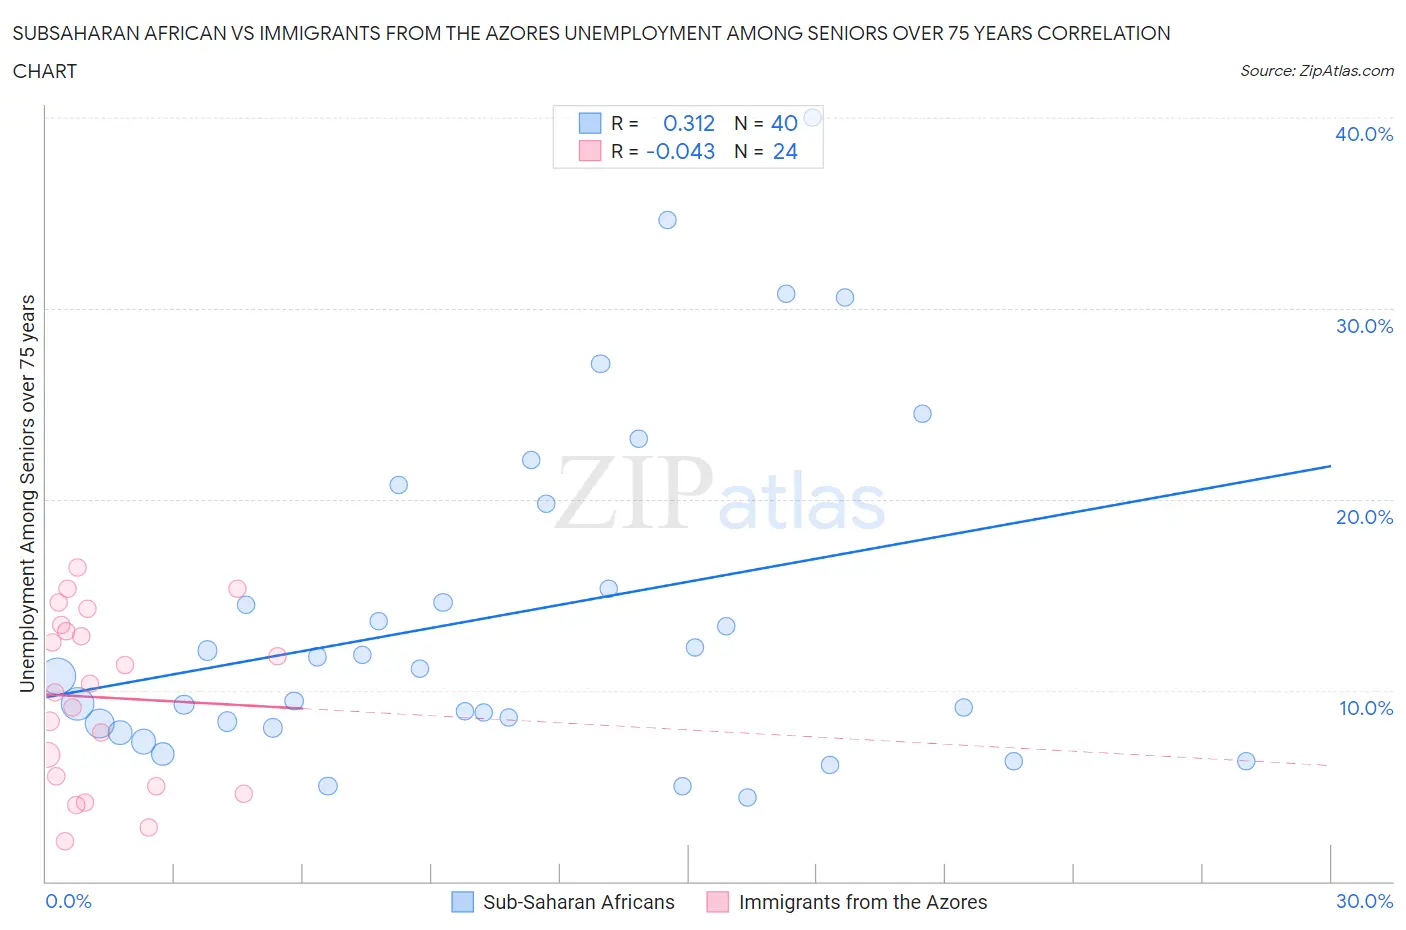 Subsaharan African vs Immigrants from the Azores Unemployment Among Seniors over 75 years